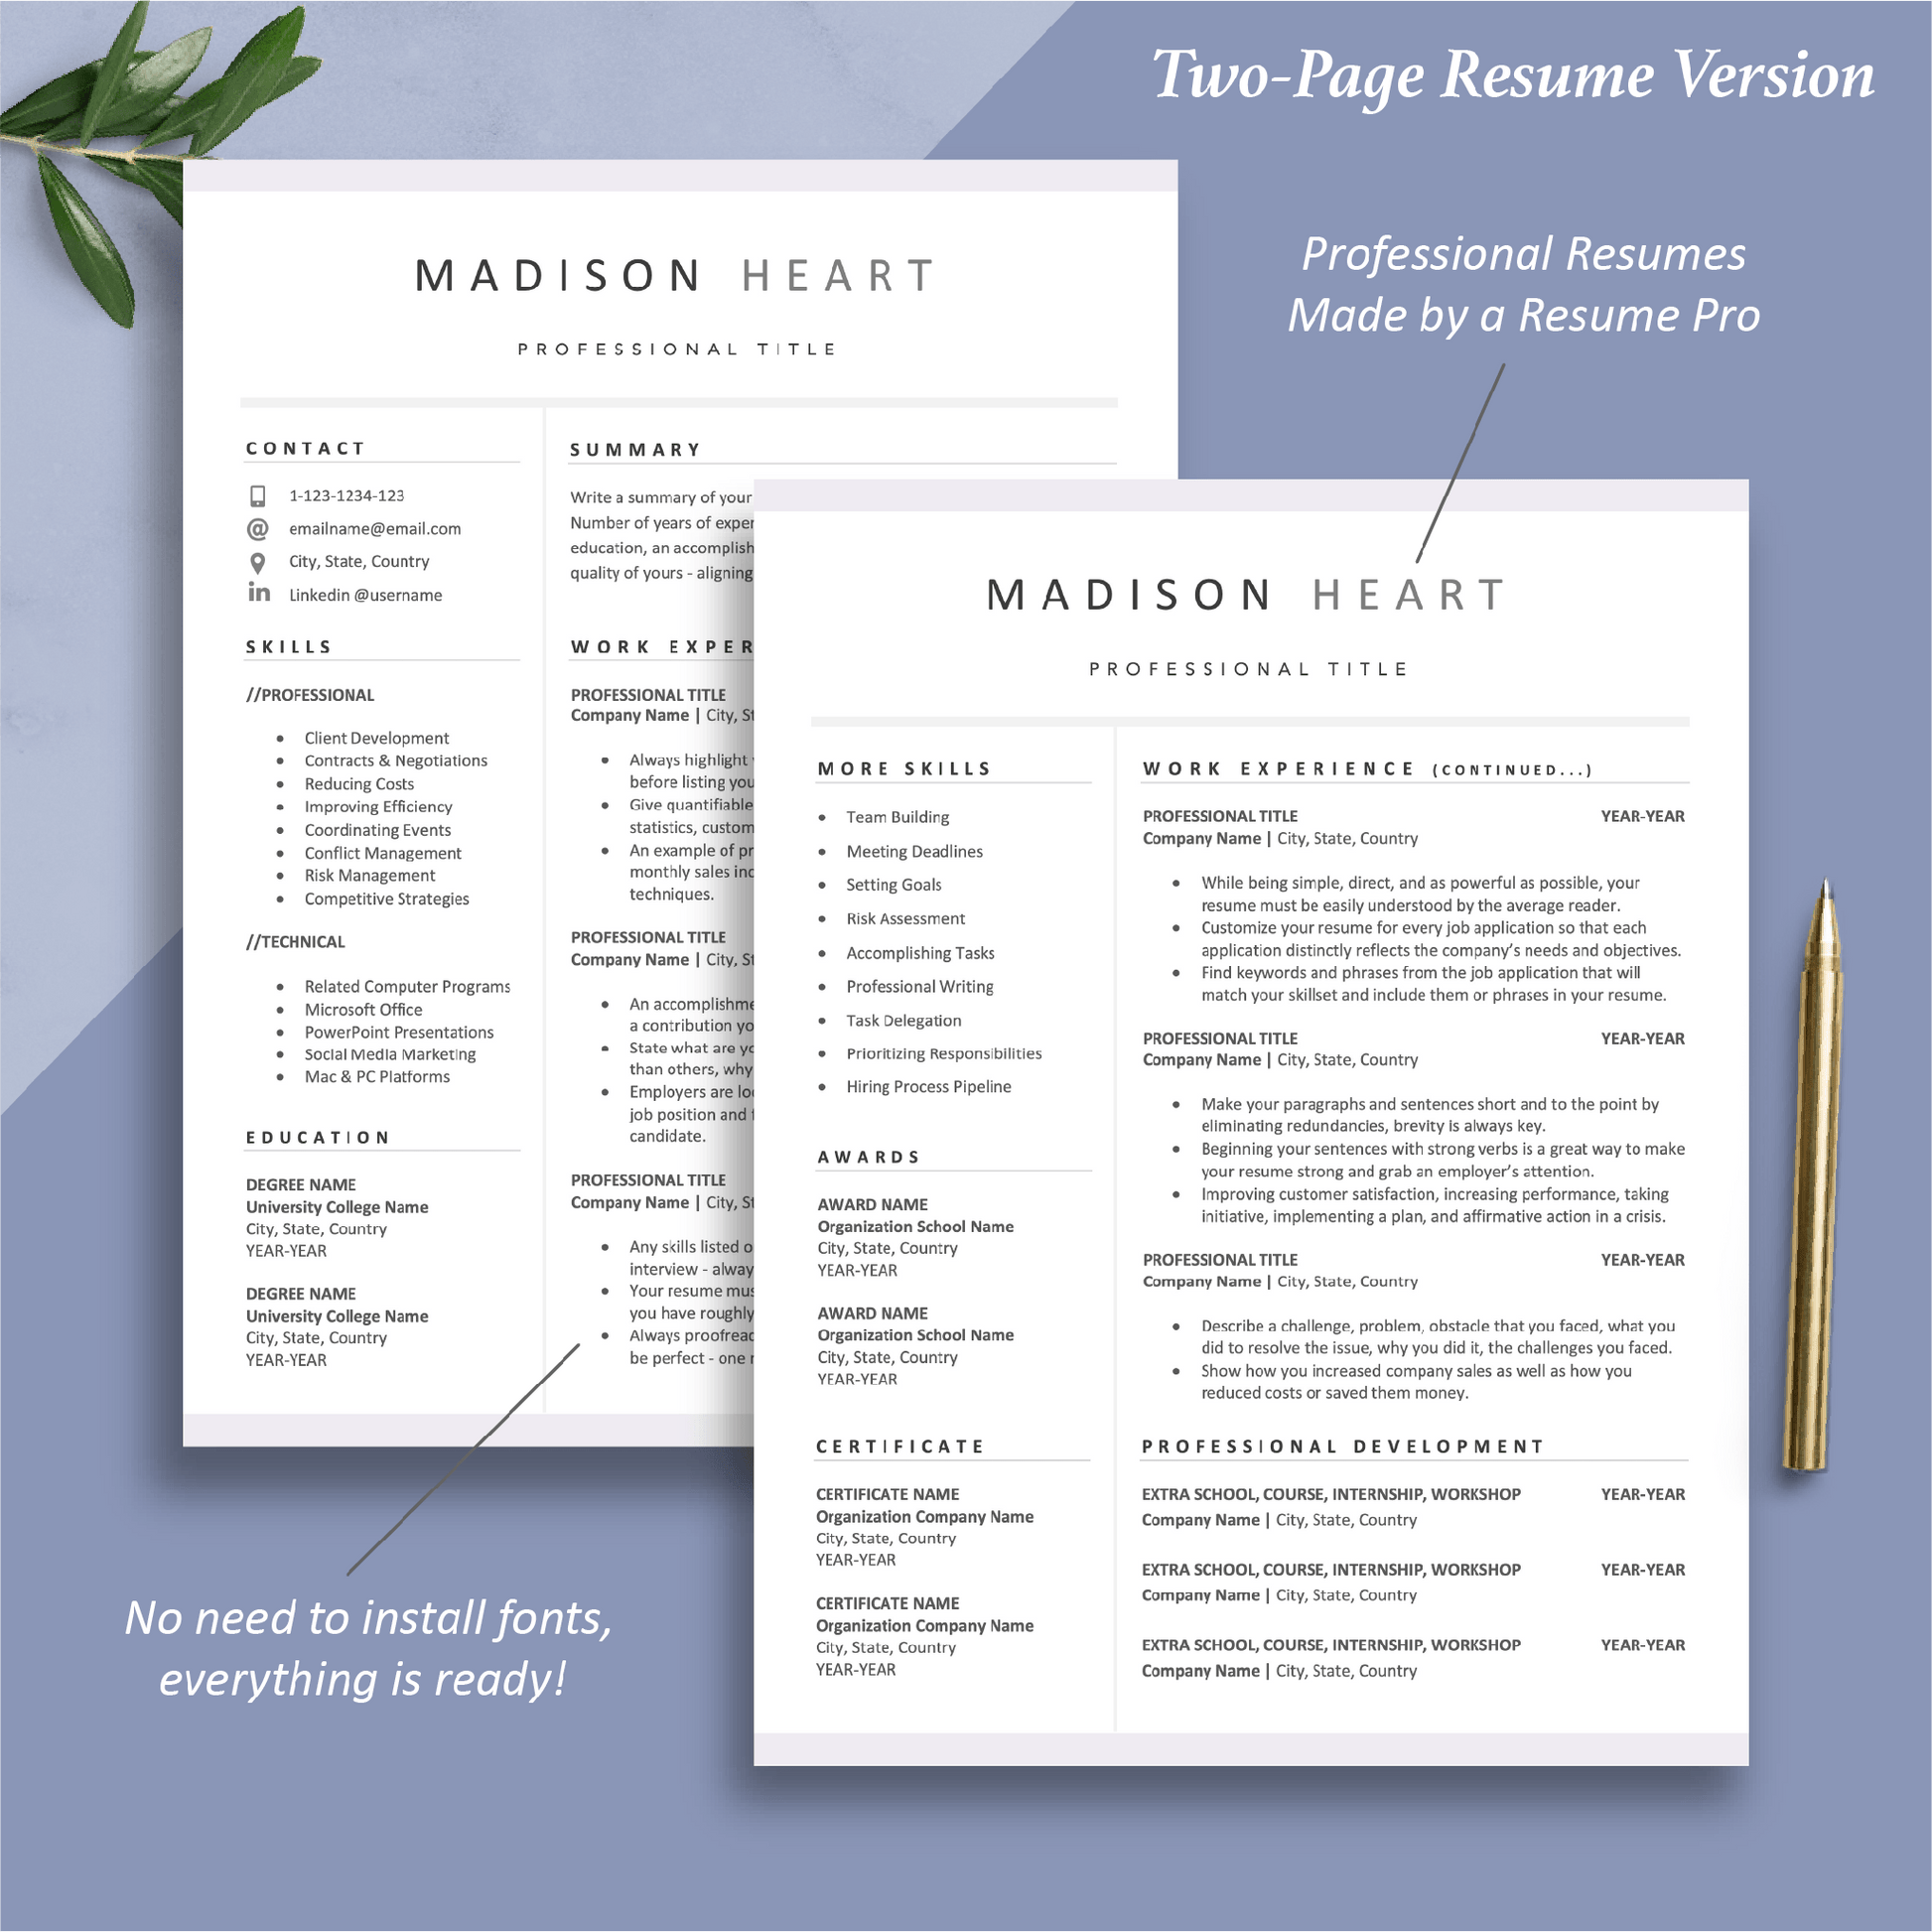 The Art of Resume | 2-Page Executive Resume Template Format